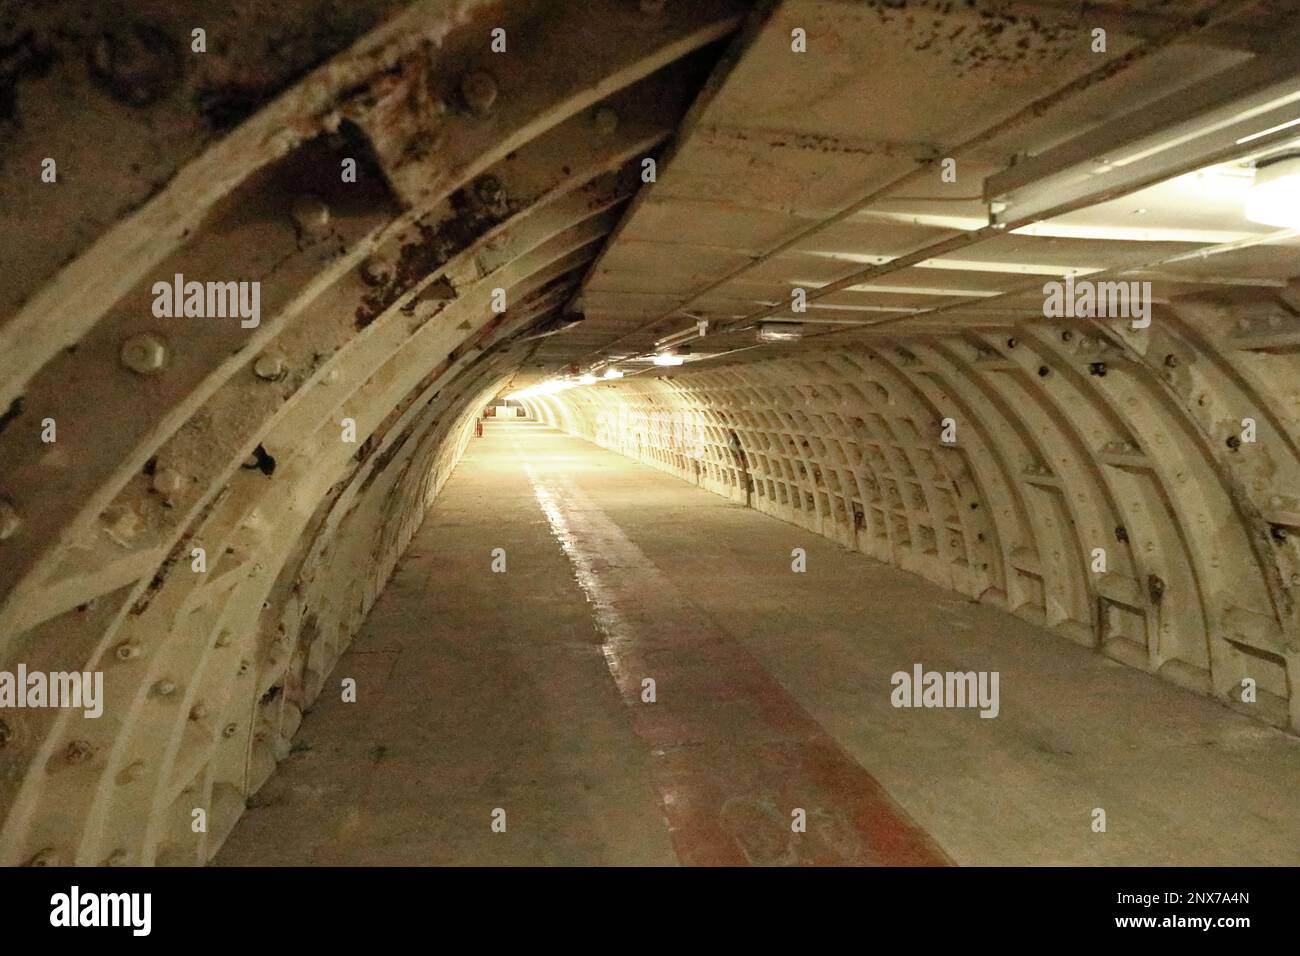 London, England, UK - Tunnel of Clapham South Deep-Level Shelter built in World War II as air-raid shelter Stock Photo